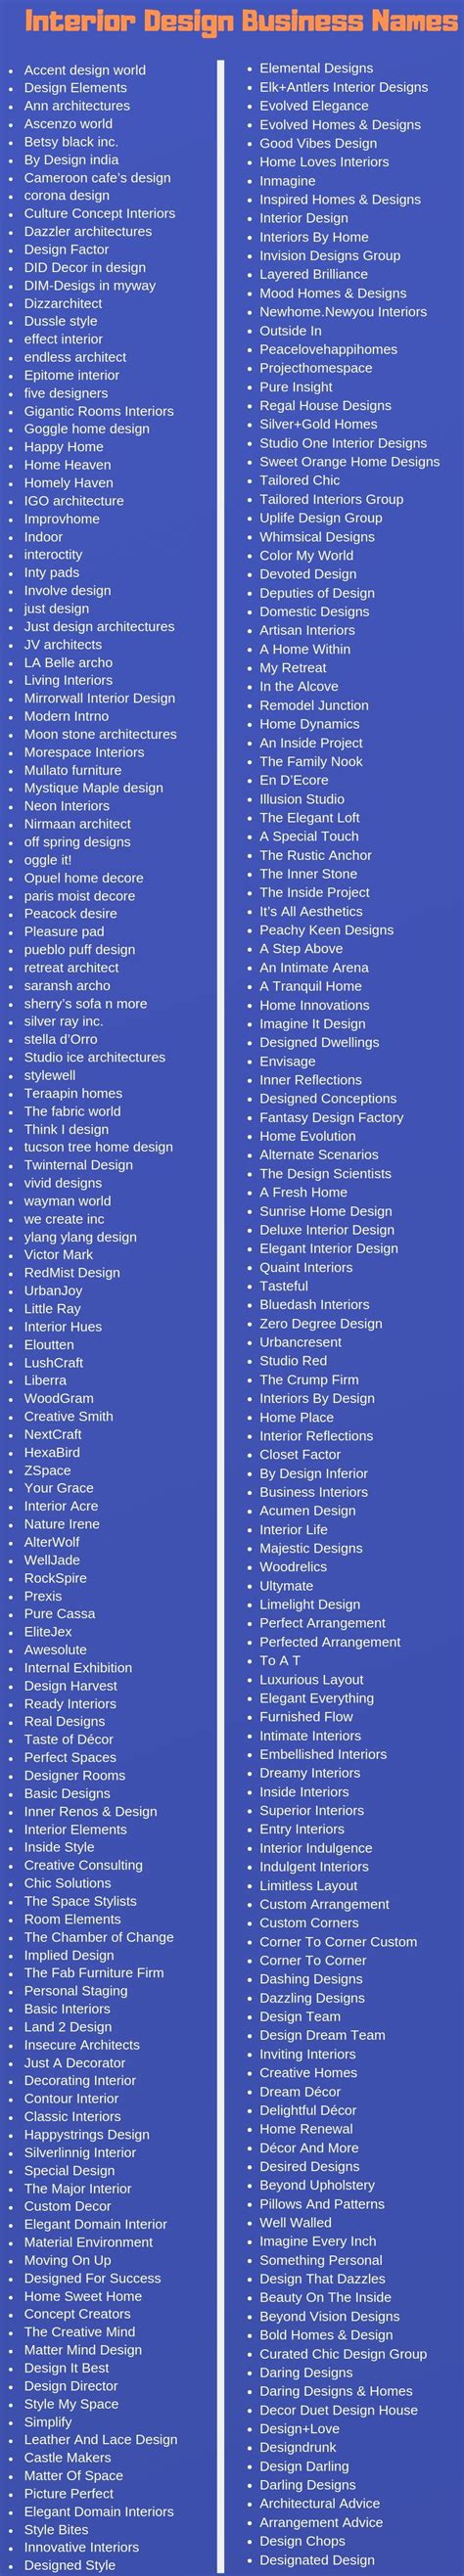 360 Interior Design Business Name Ideas And Suggestions